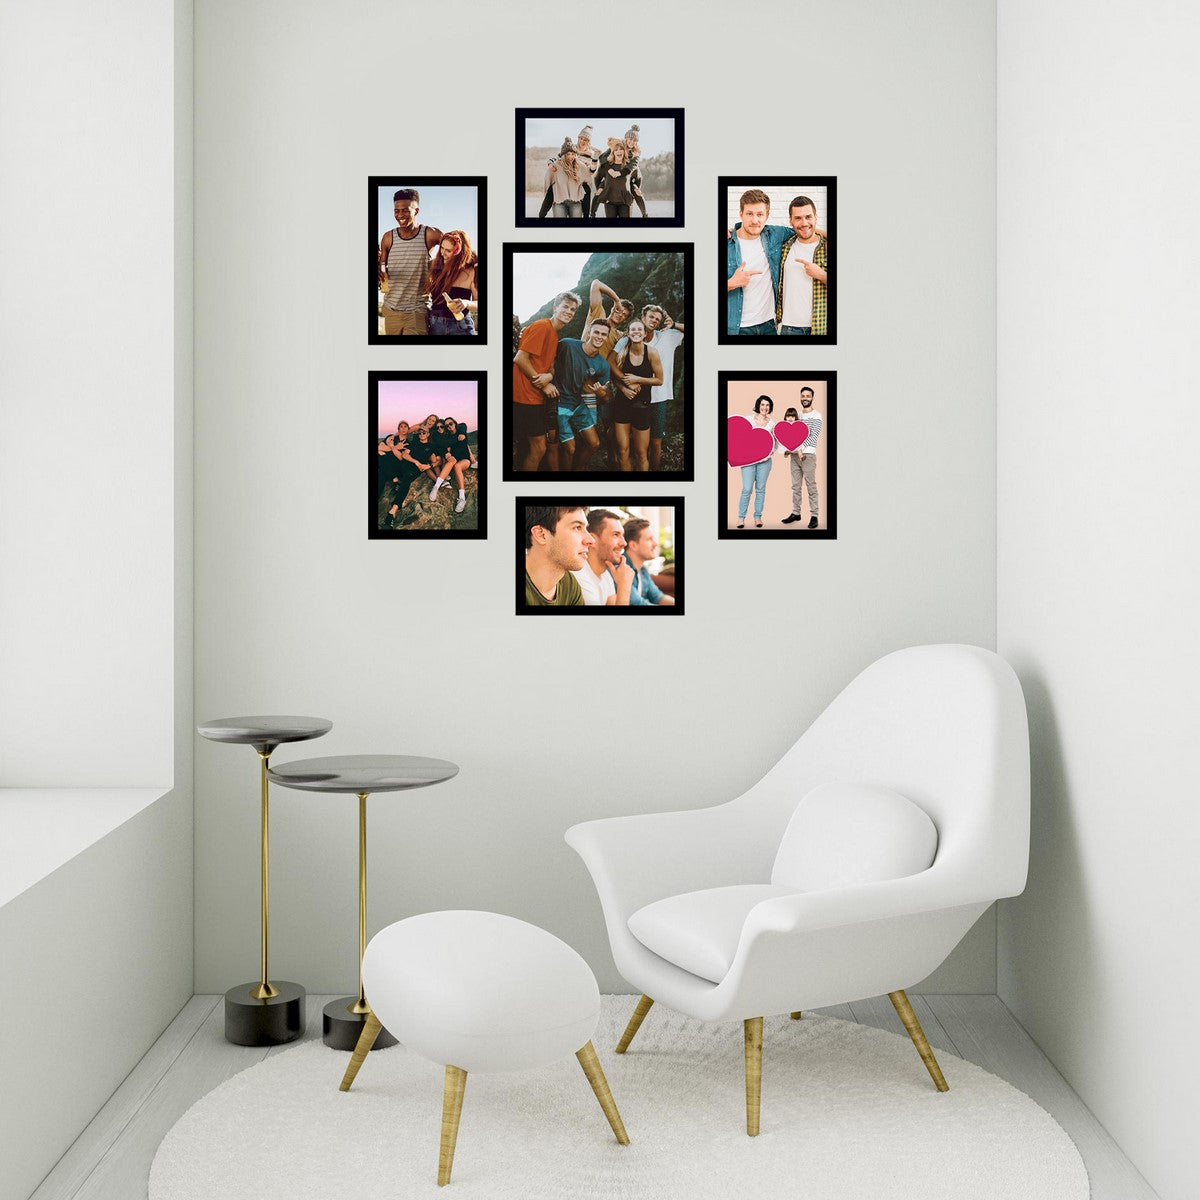 Memory Wall Collage Photo Frame - Set of 7 Photo Frames for 6 Photos of 5"x7", 1 Photos of 8"x10" 2